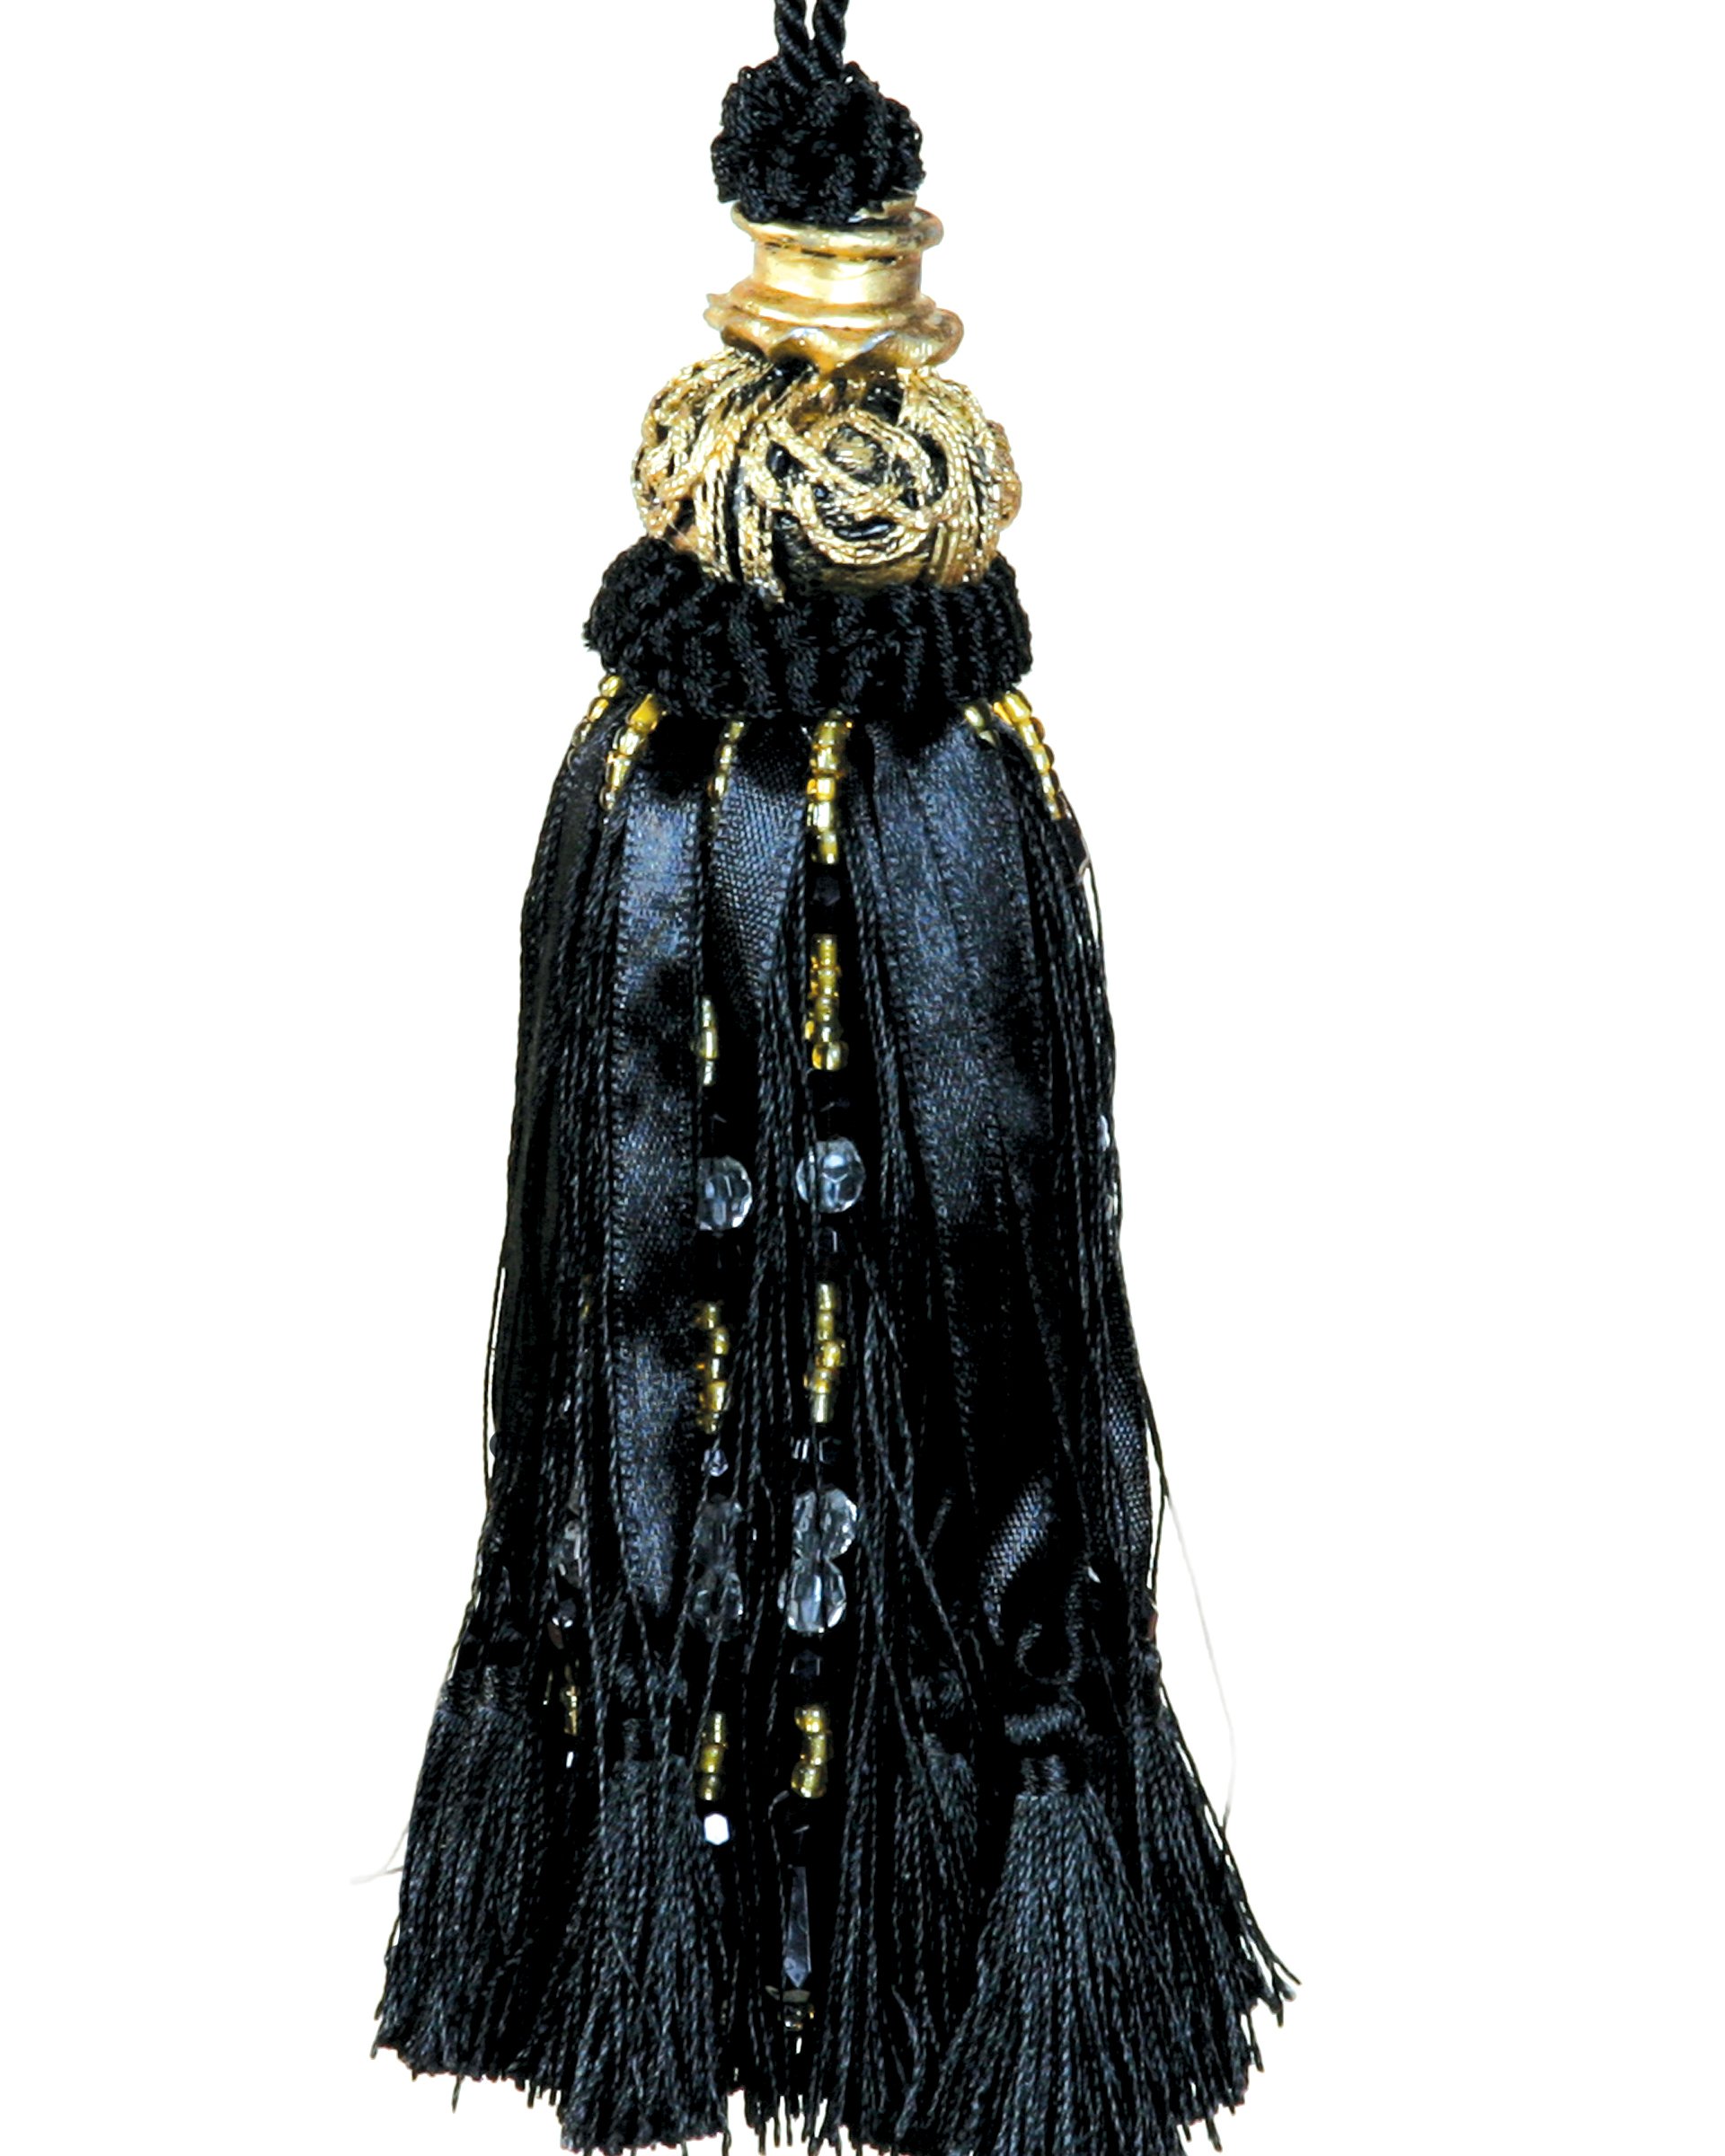 Tassel with Beads/Ribbons - BLACK/GOLD 17cm